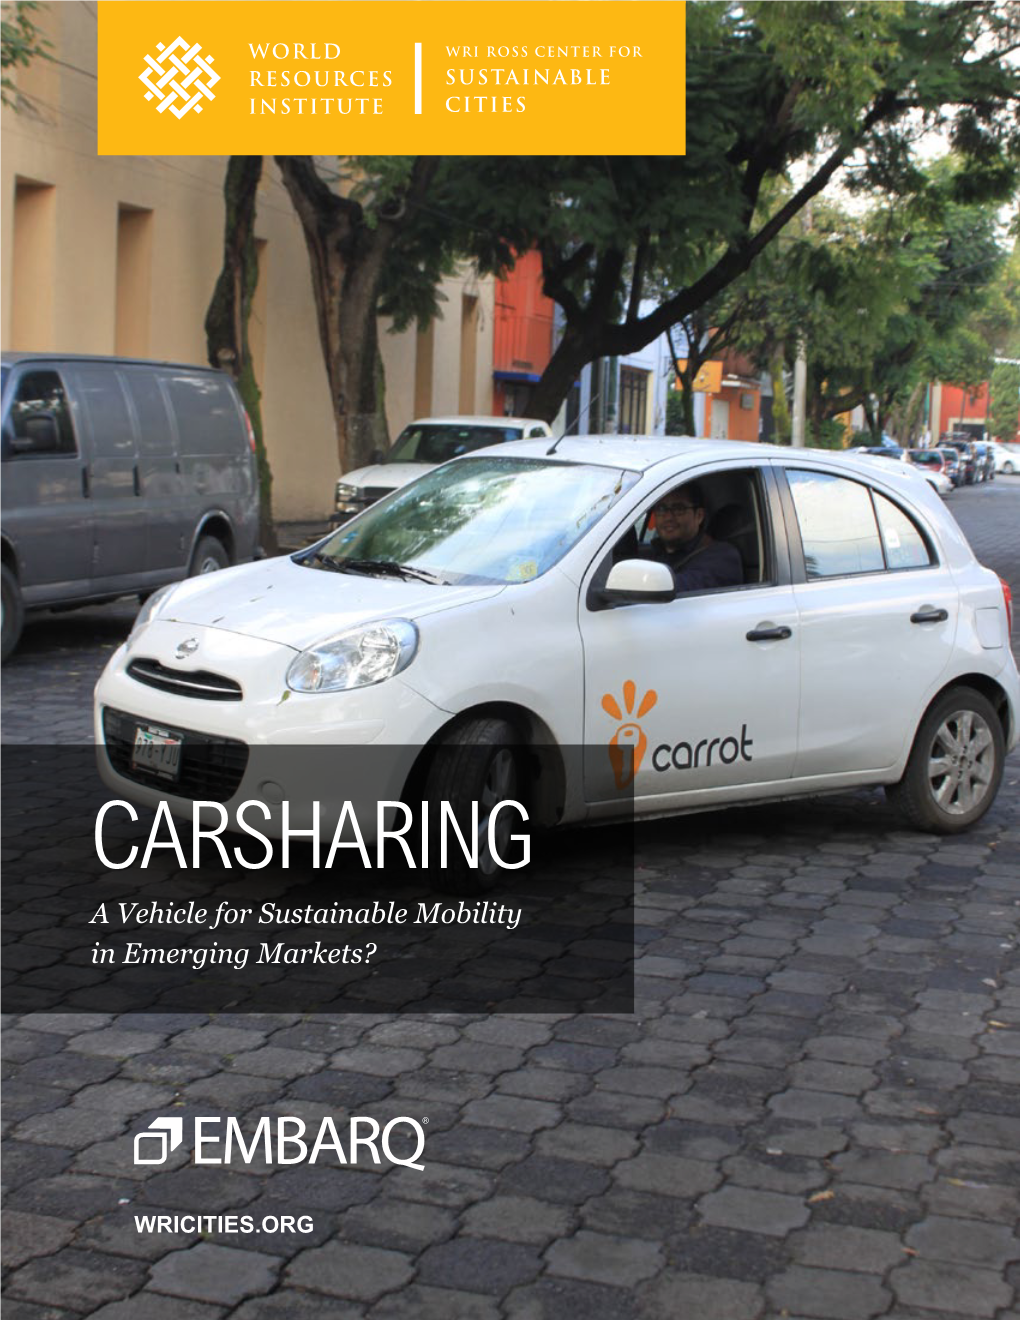 CARSHARING a Vehicle for Sustainable Mobility in Emerging Markets?